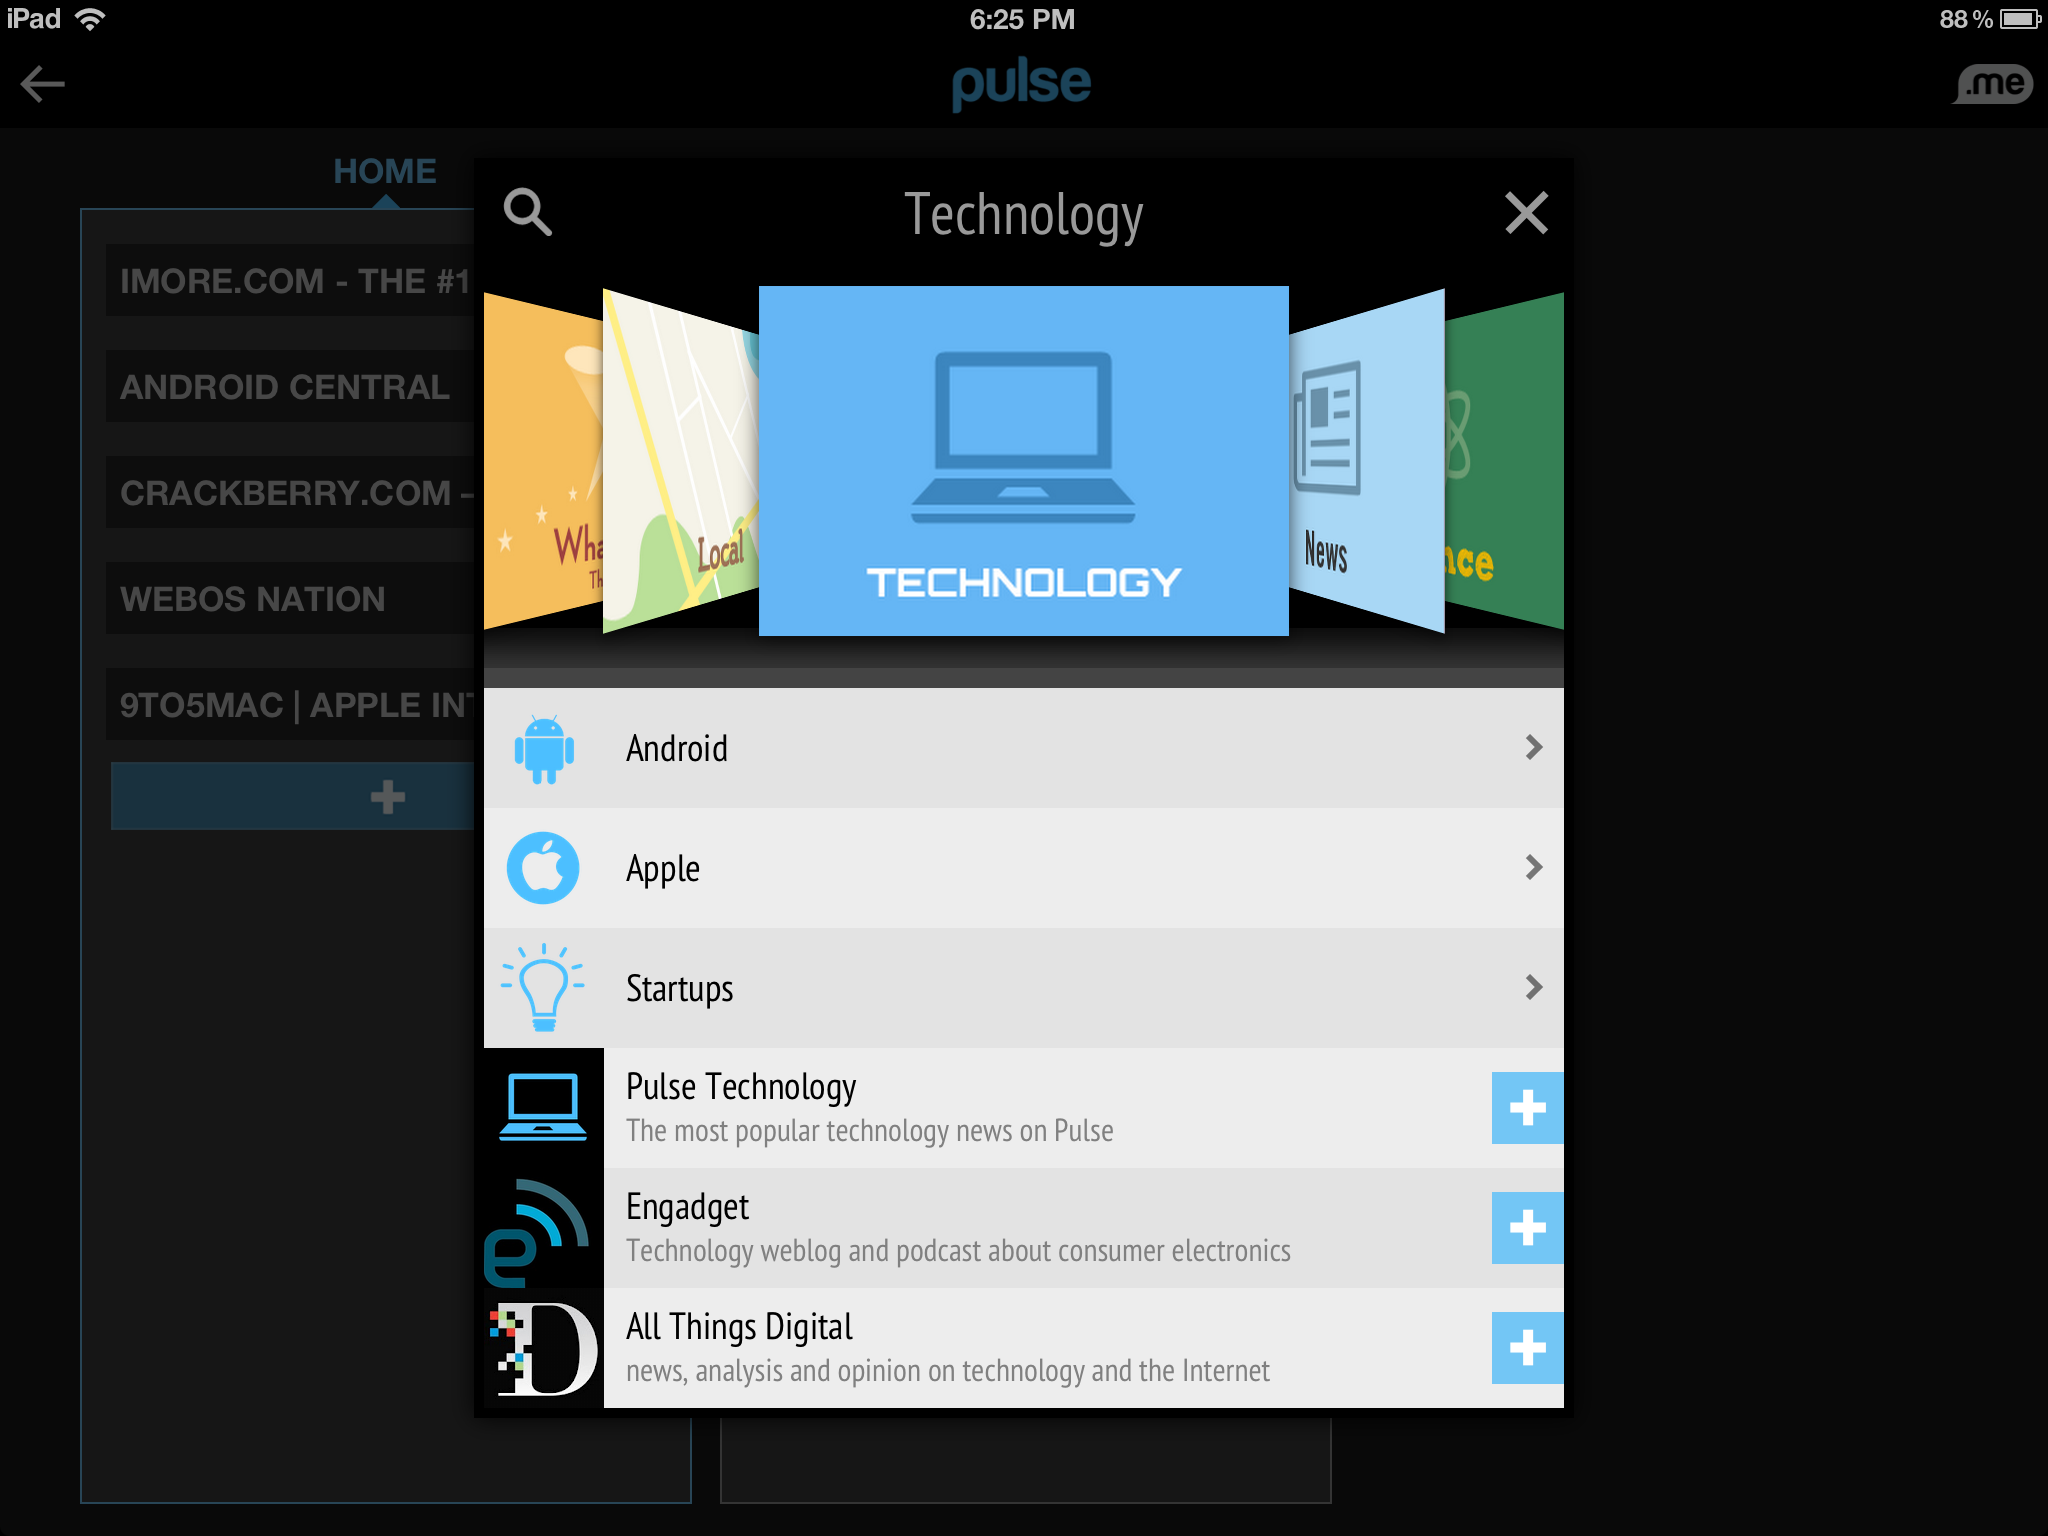 Add more news feeds or select from recommendations with Pulse for iPad